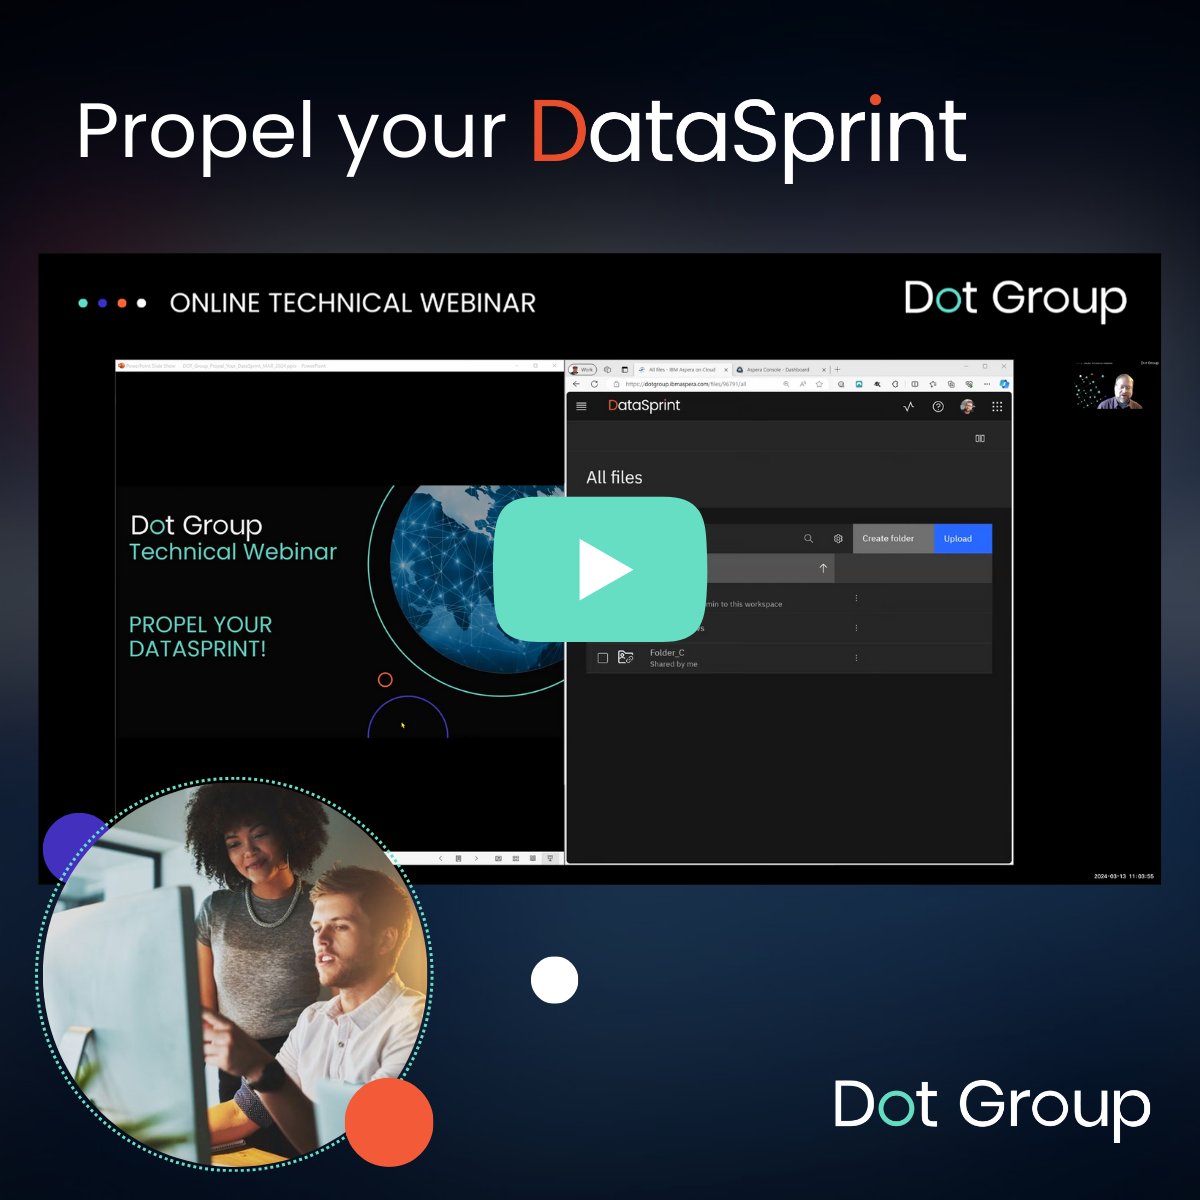 We recently hosted a webinar exploring #DataSprint, our #filetransfer solution powered by IBM Aspera technology. If you didn’t catch it live or just want a recap on how to get the most out of your subscription, you can request a copy of the recording at: bit.ly/4a6VVlt